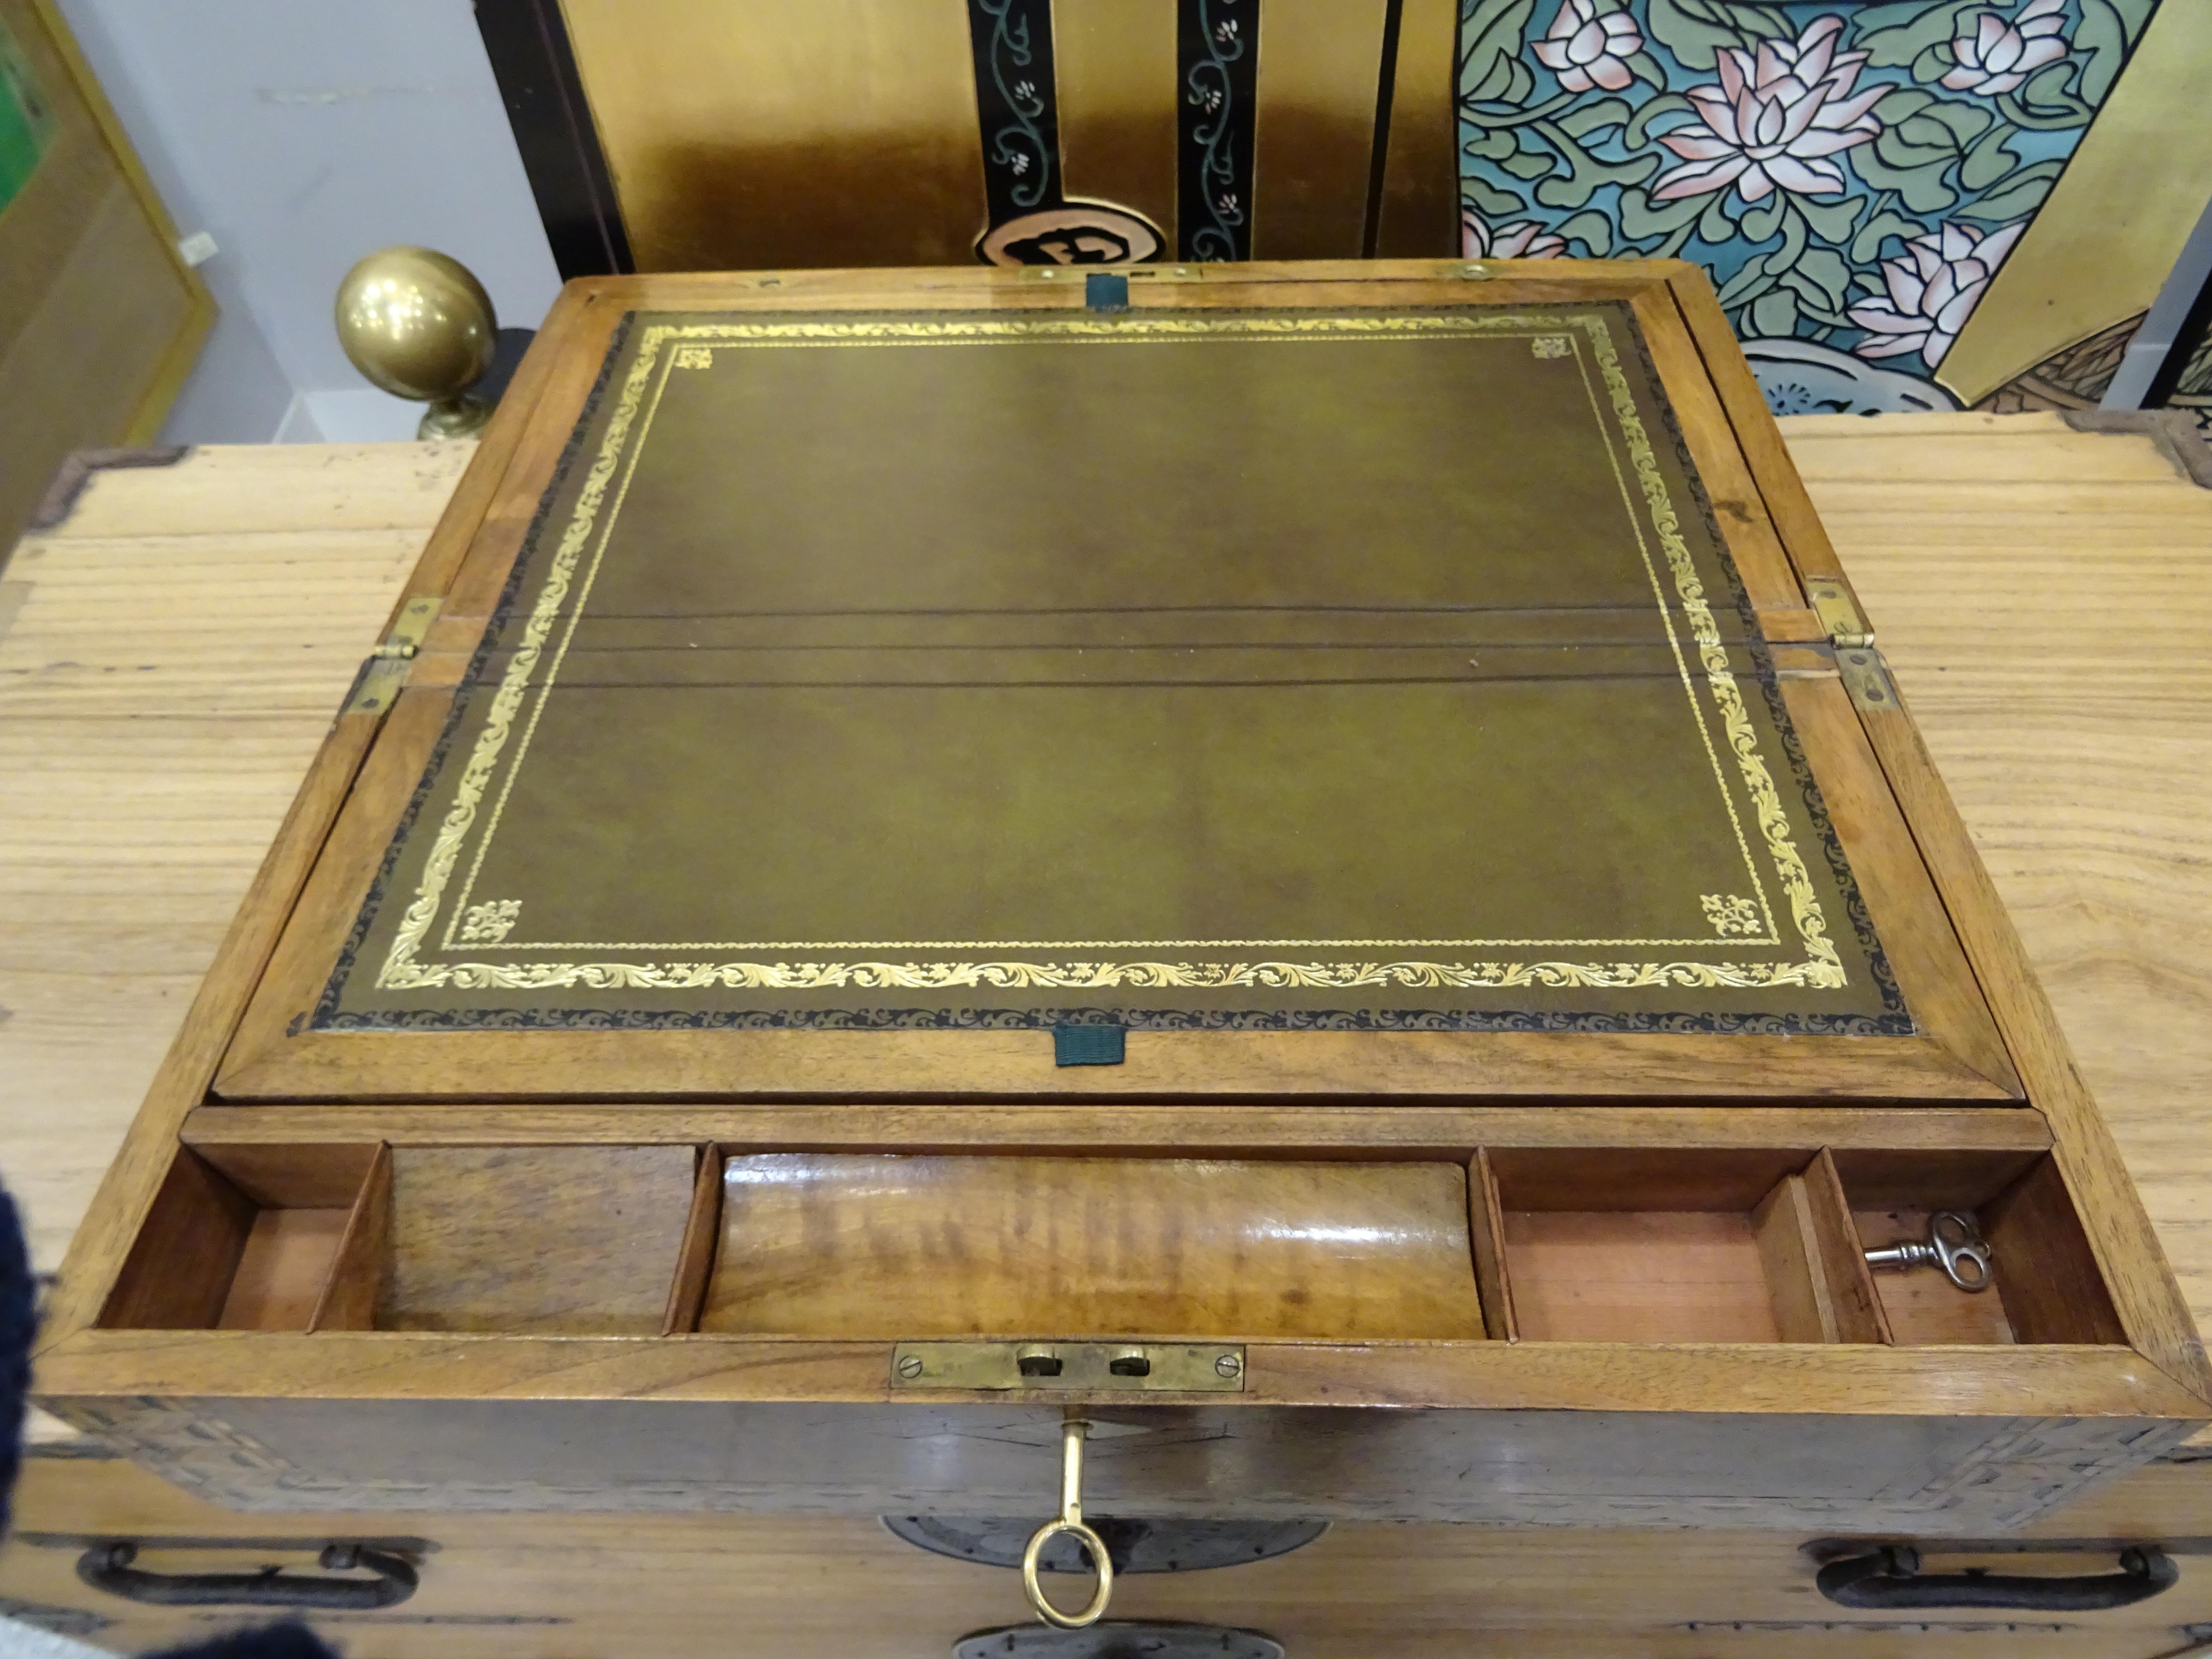 19th Century English Boat Desk-Box, Inlaid Wood and Mother of Pearl 2